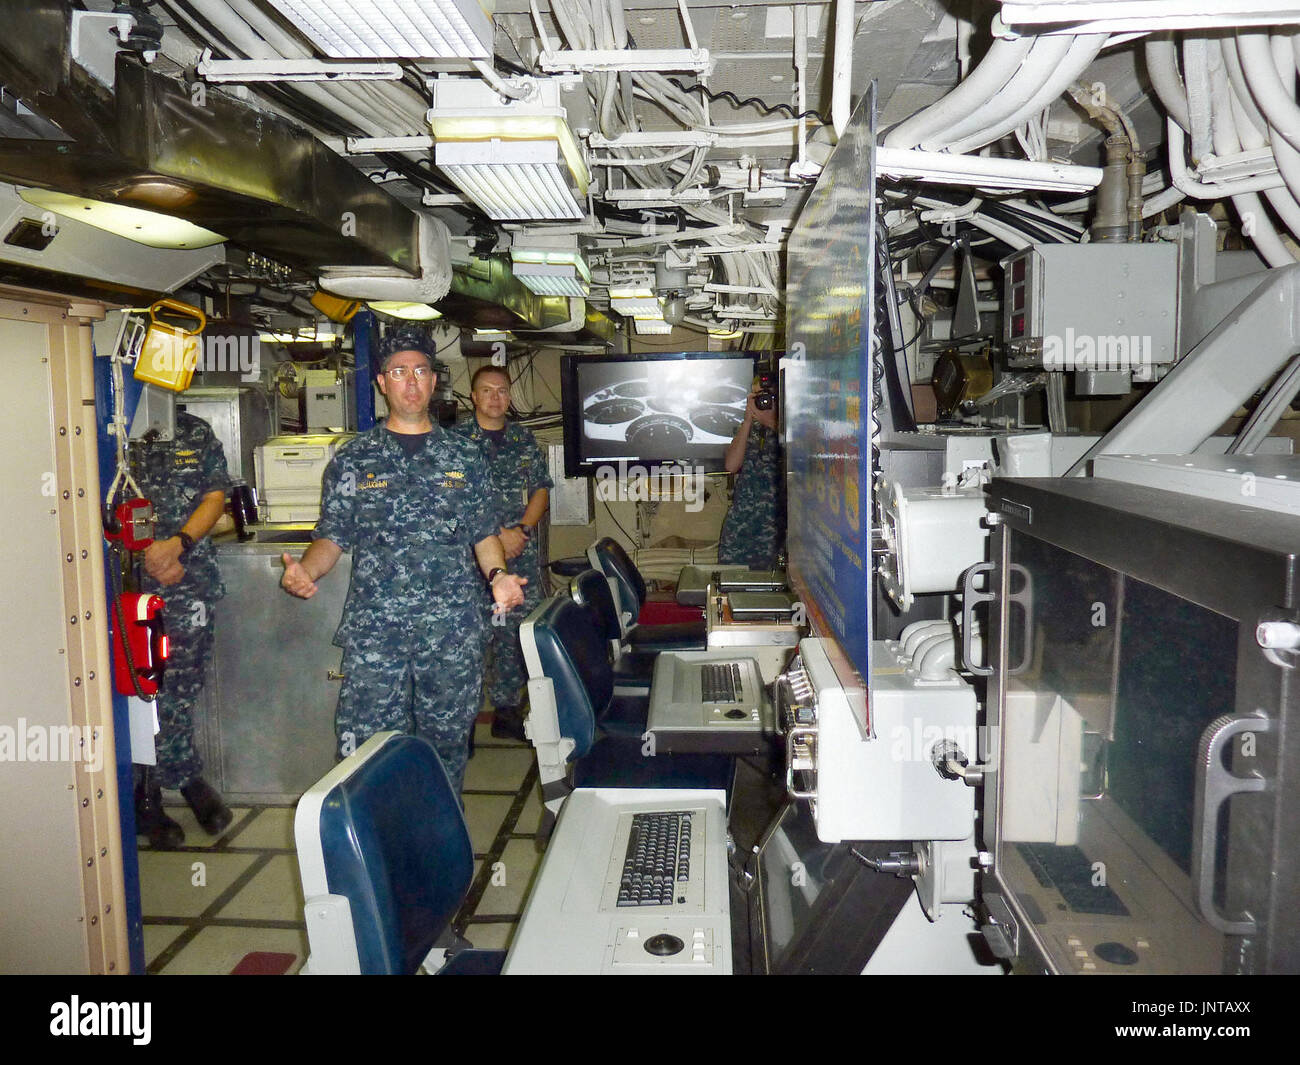 TOKYO, Japan - The U.S. Navy shows the inside of the Ohio-class nuclear